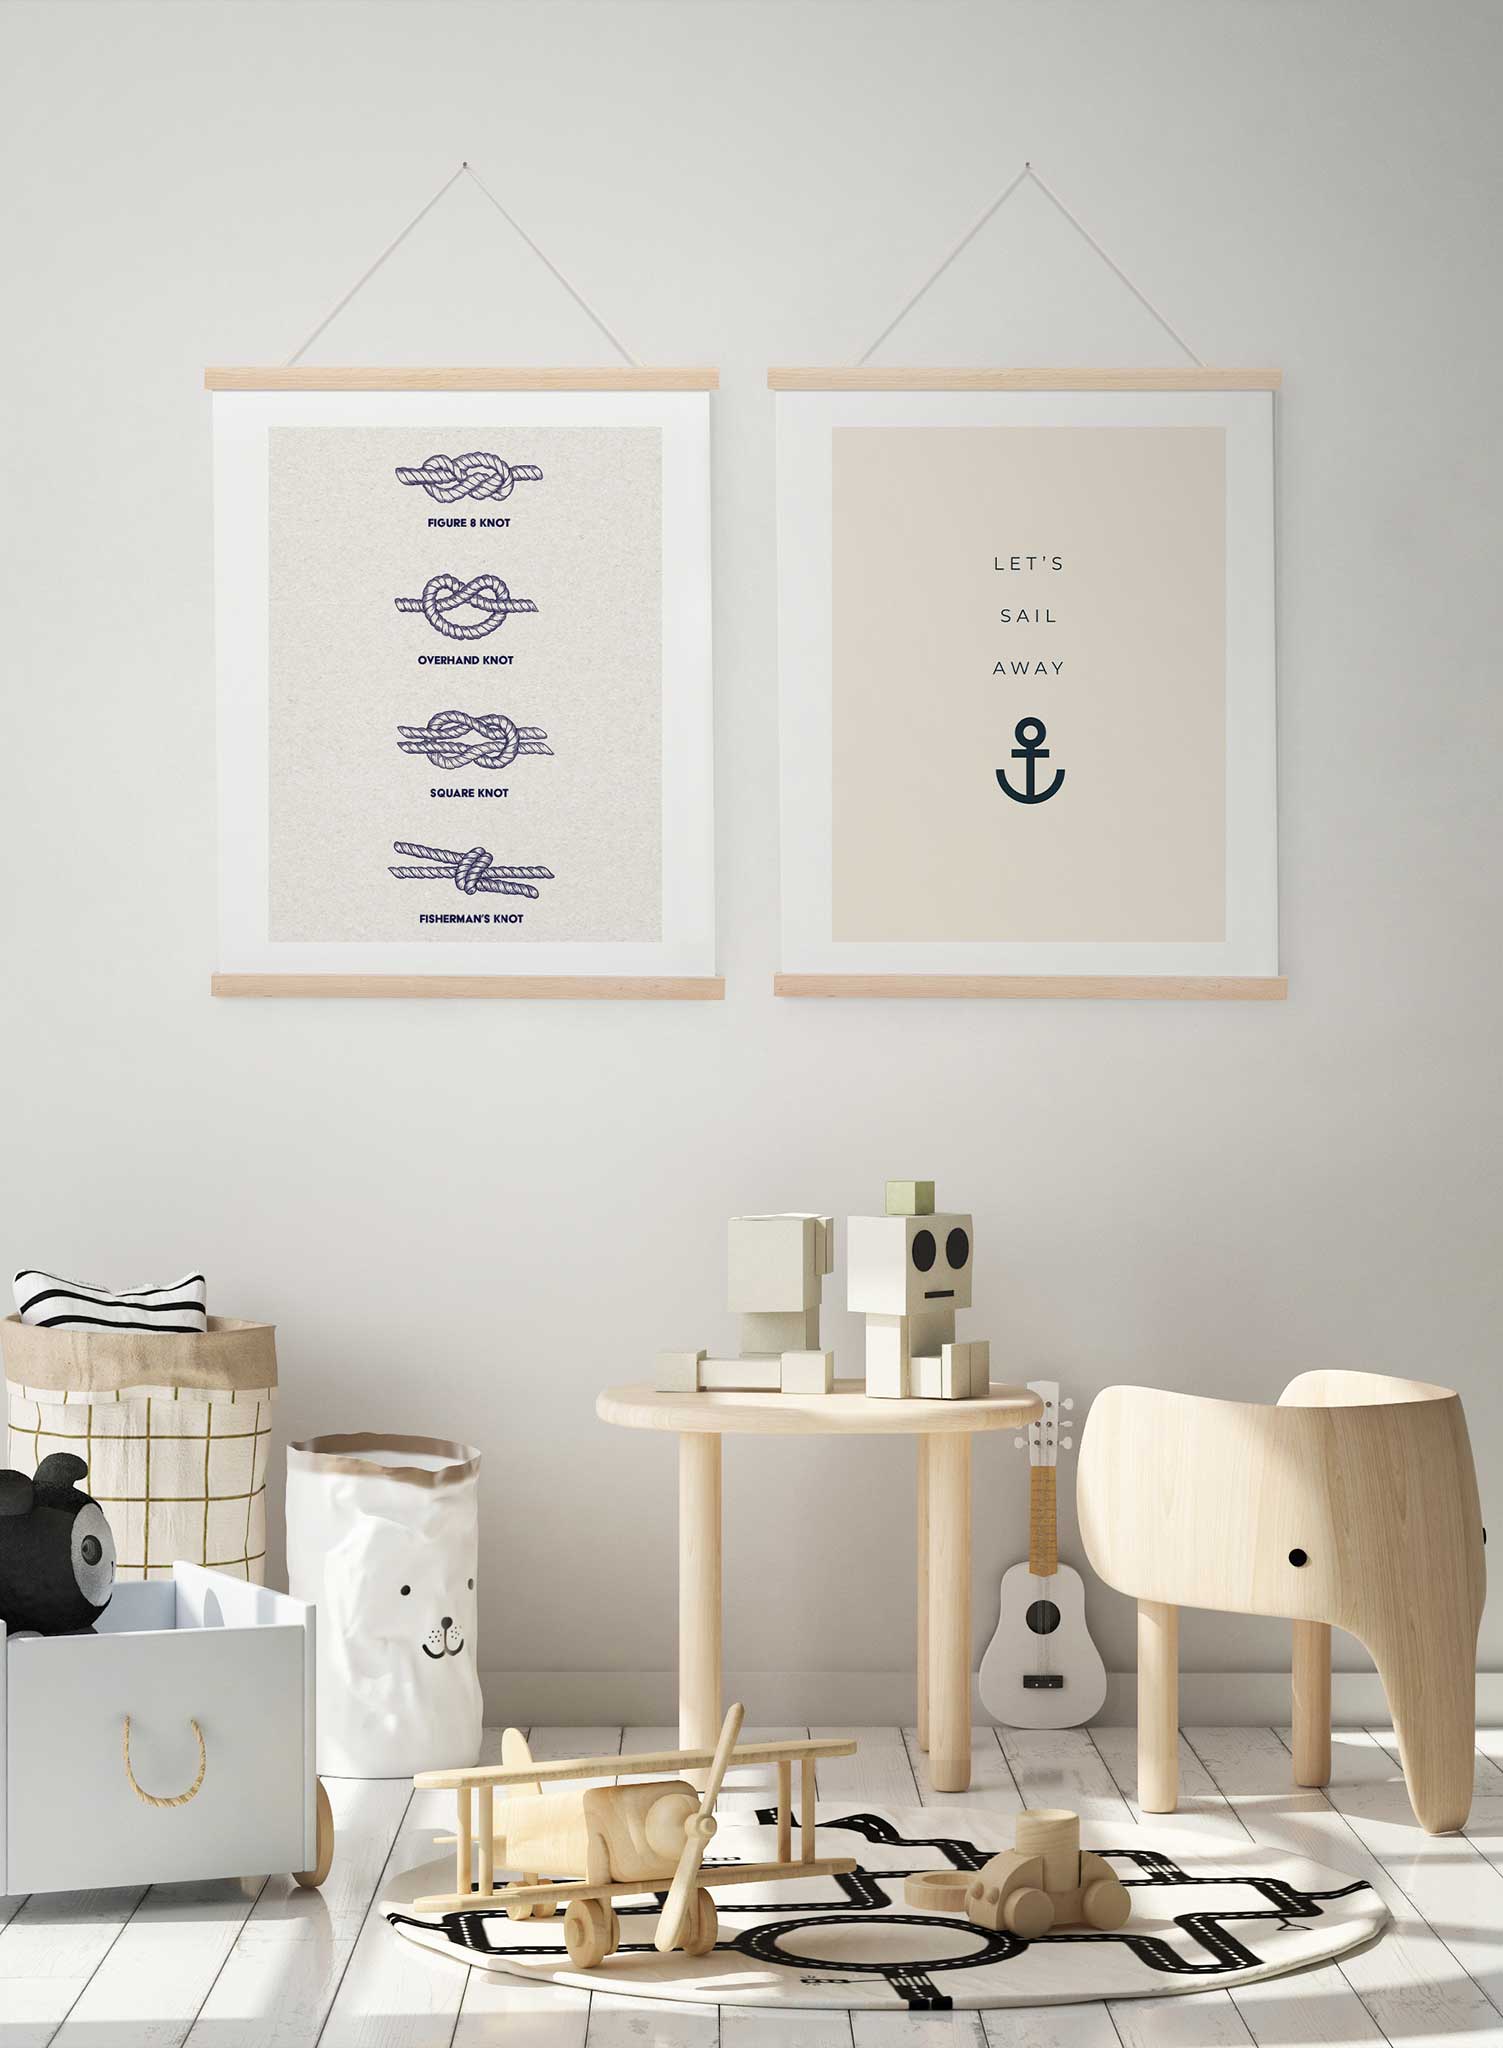 Tied Up is a minimalist illustration of a fisherman knots guide by Opposite Wall.